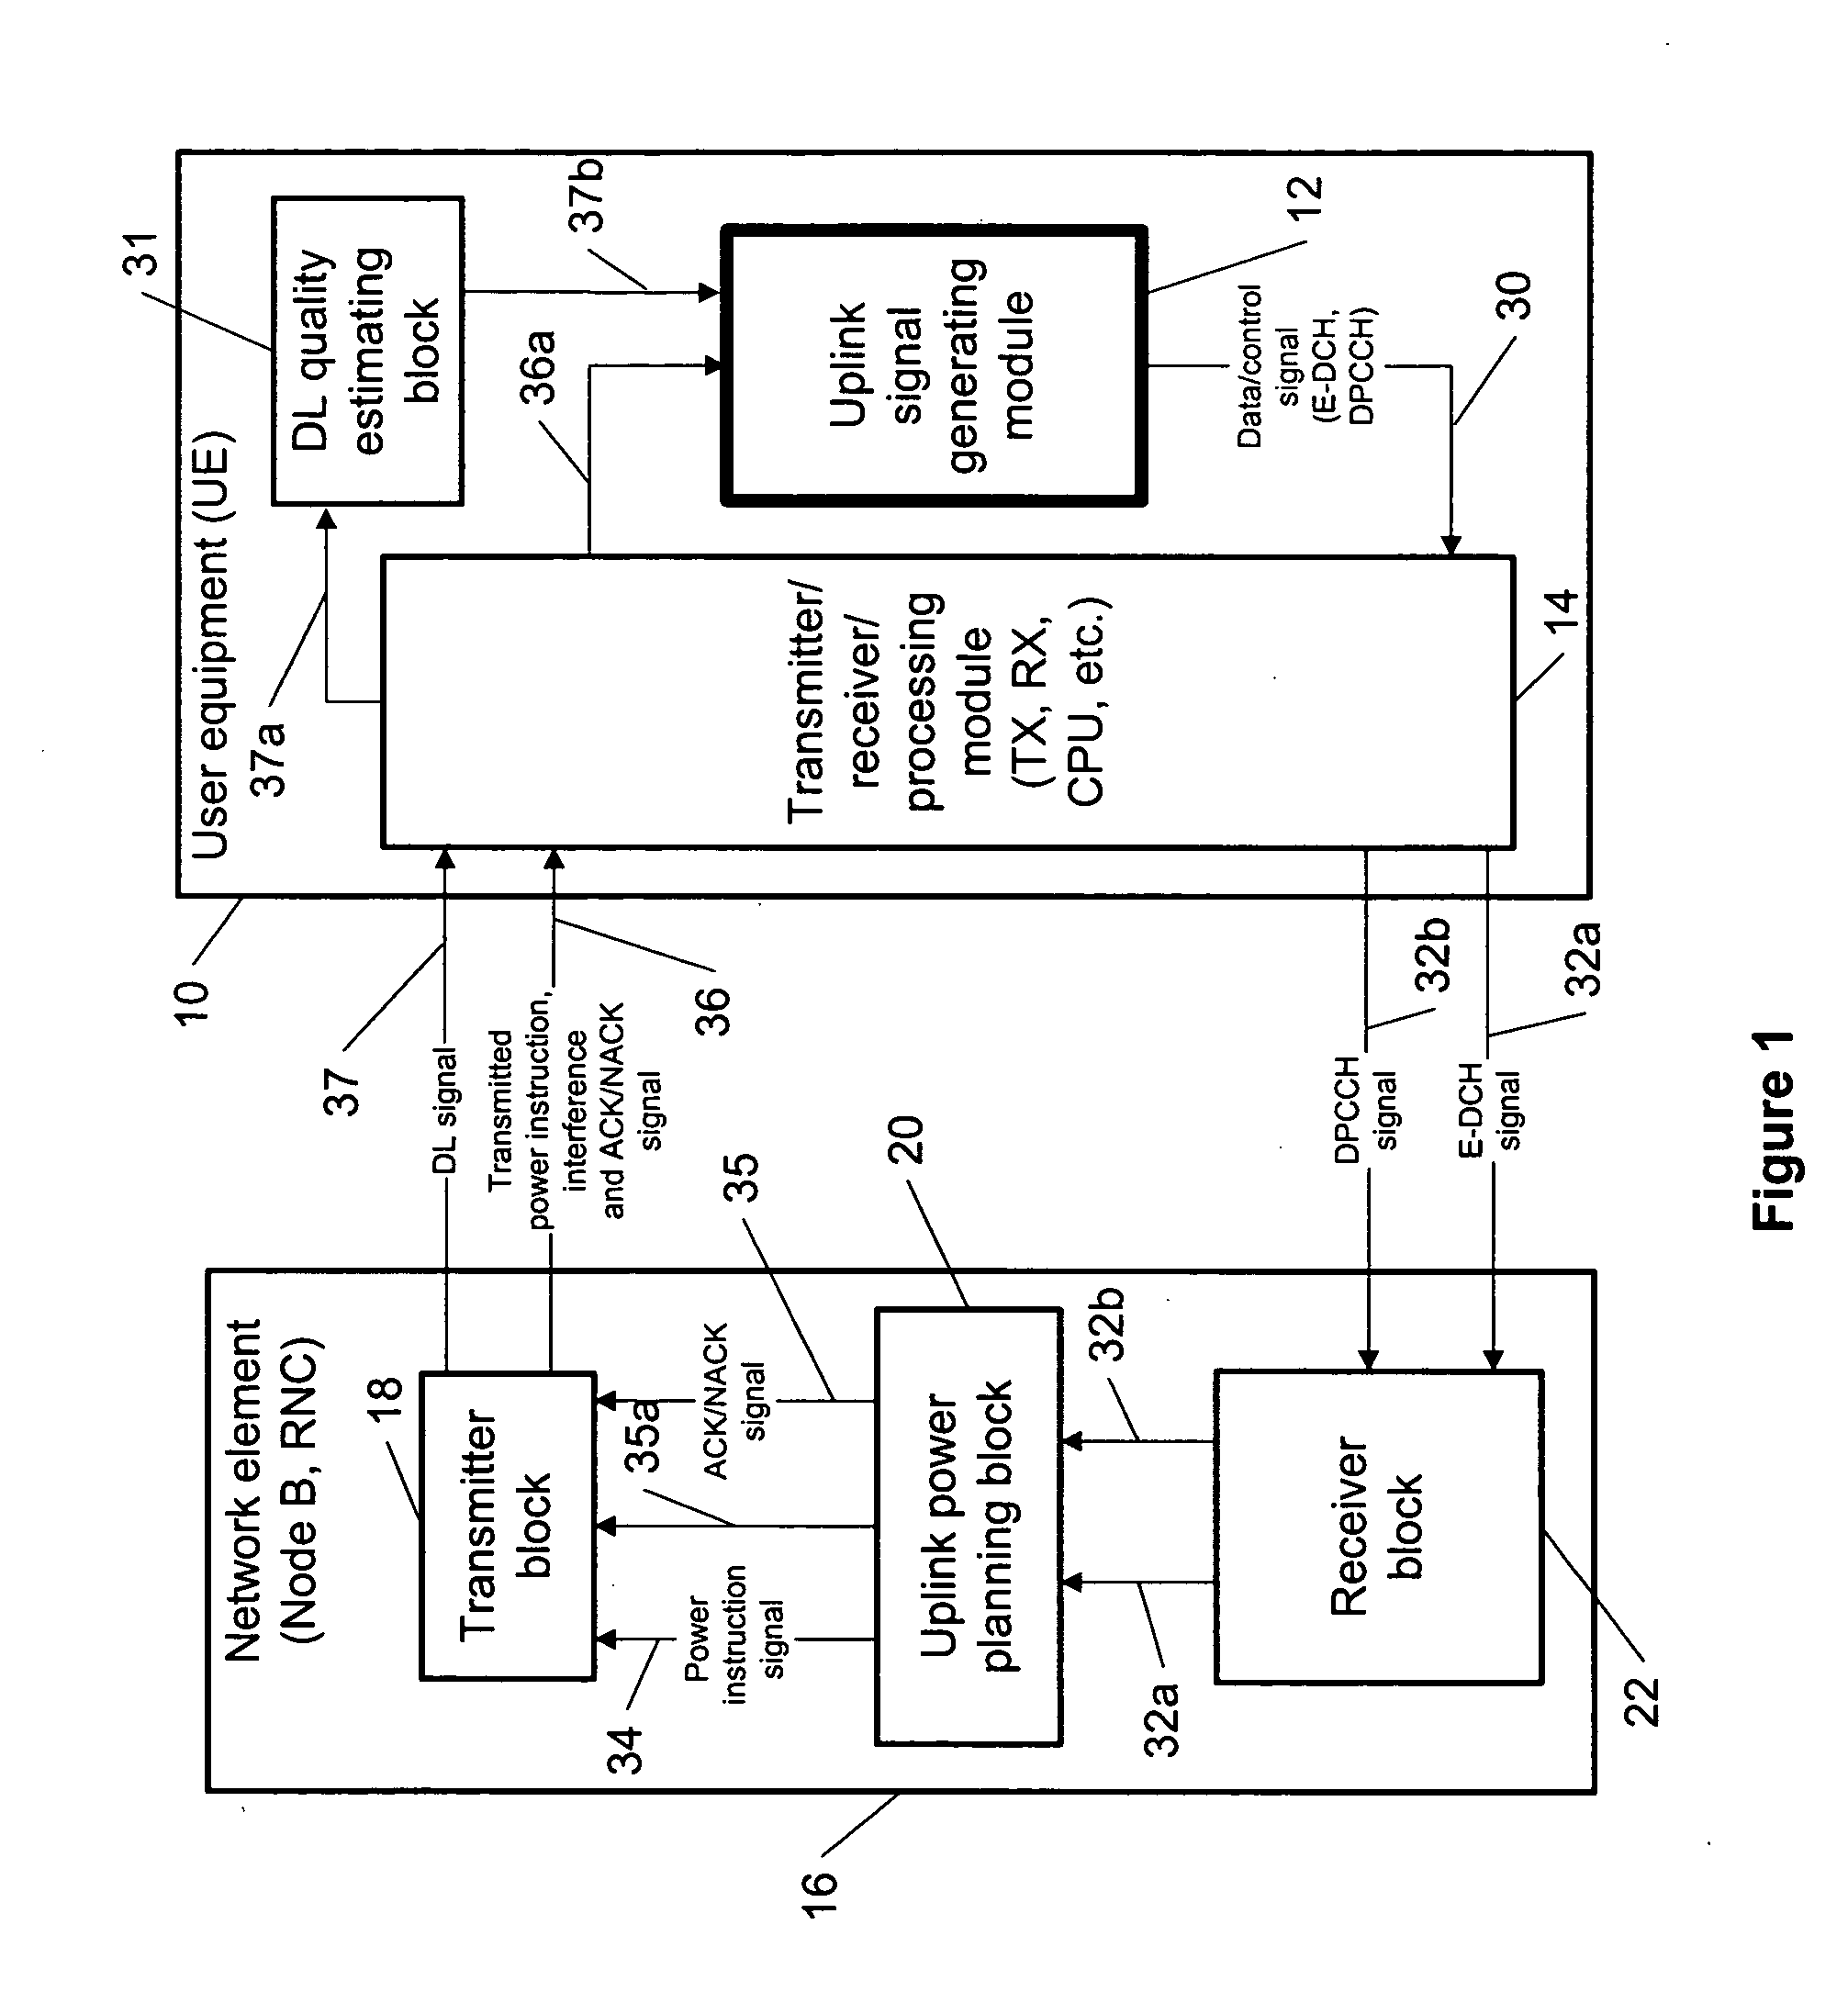 Power control for gated uplink control channel